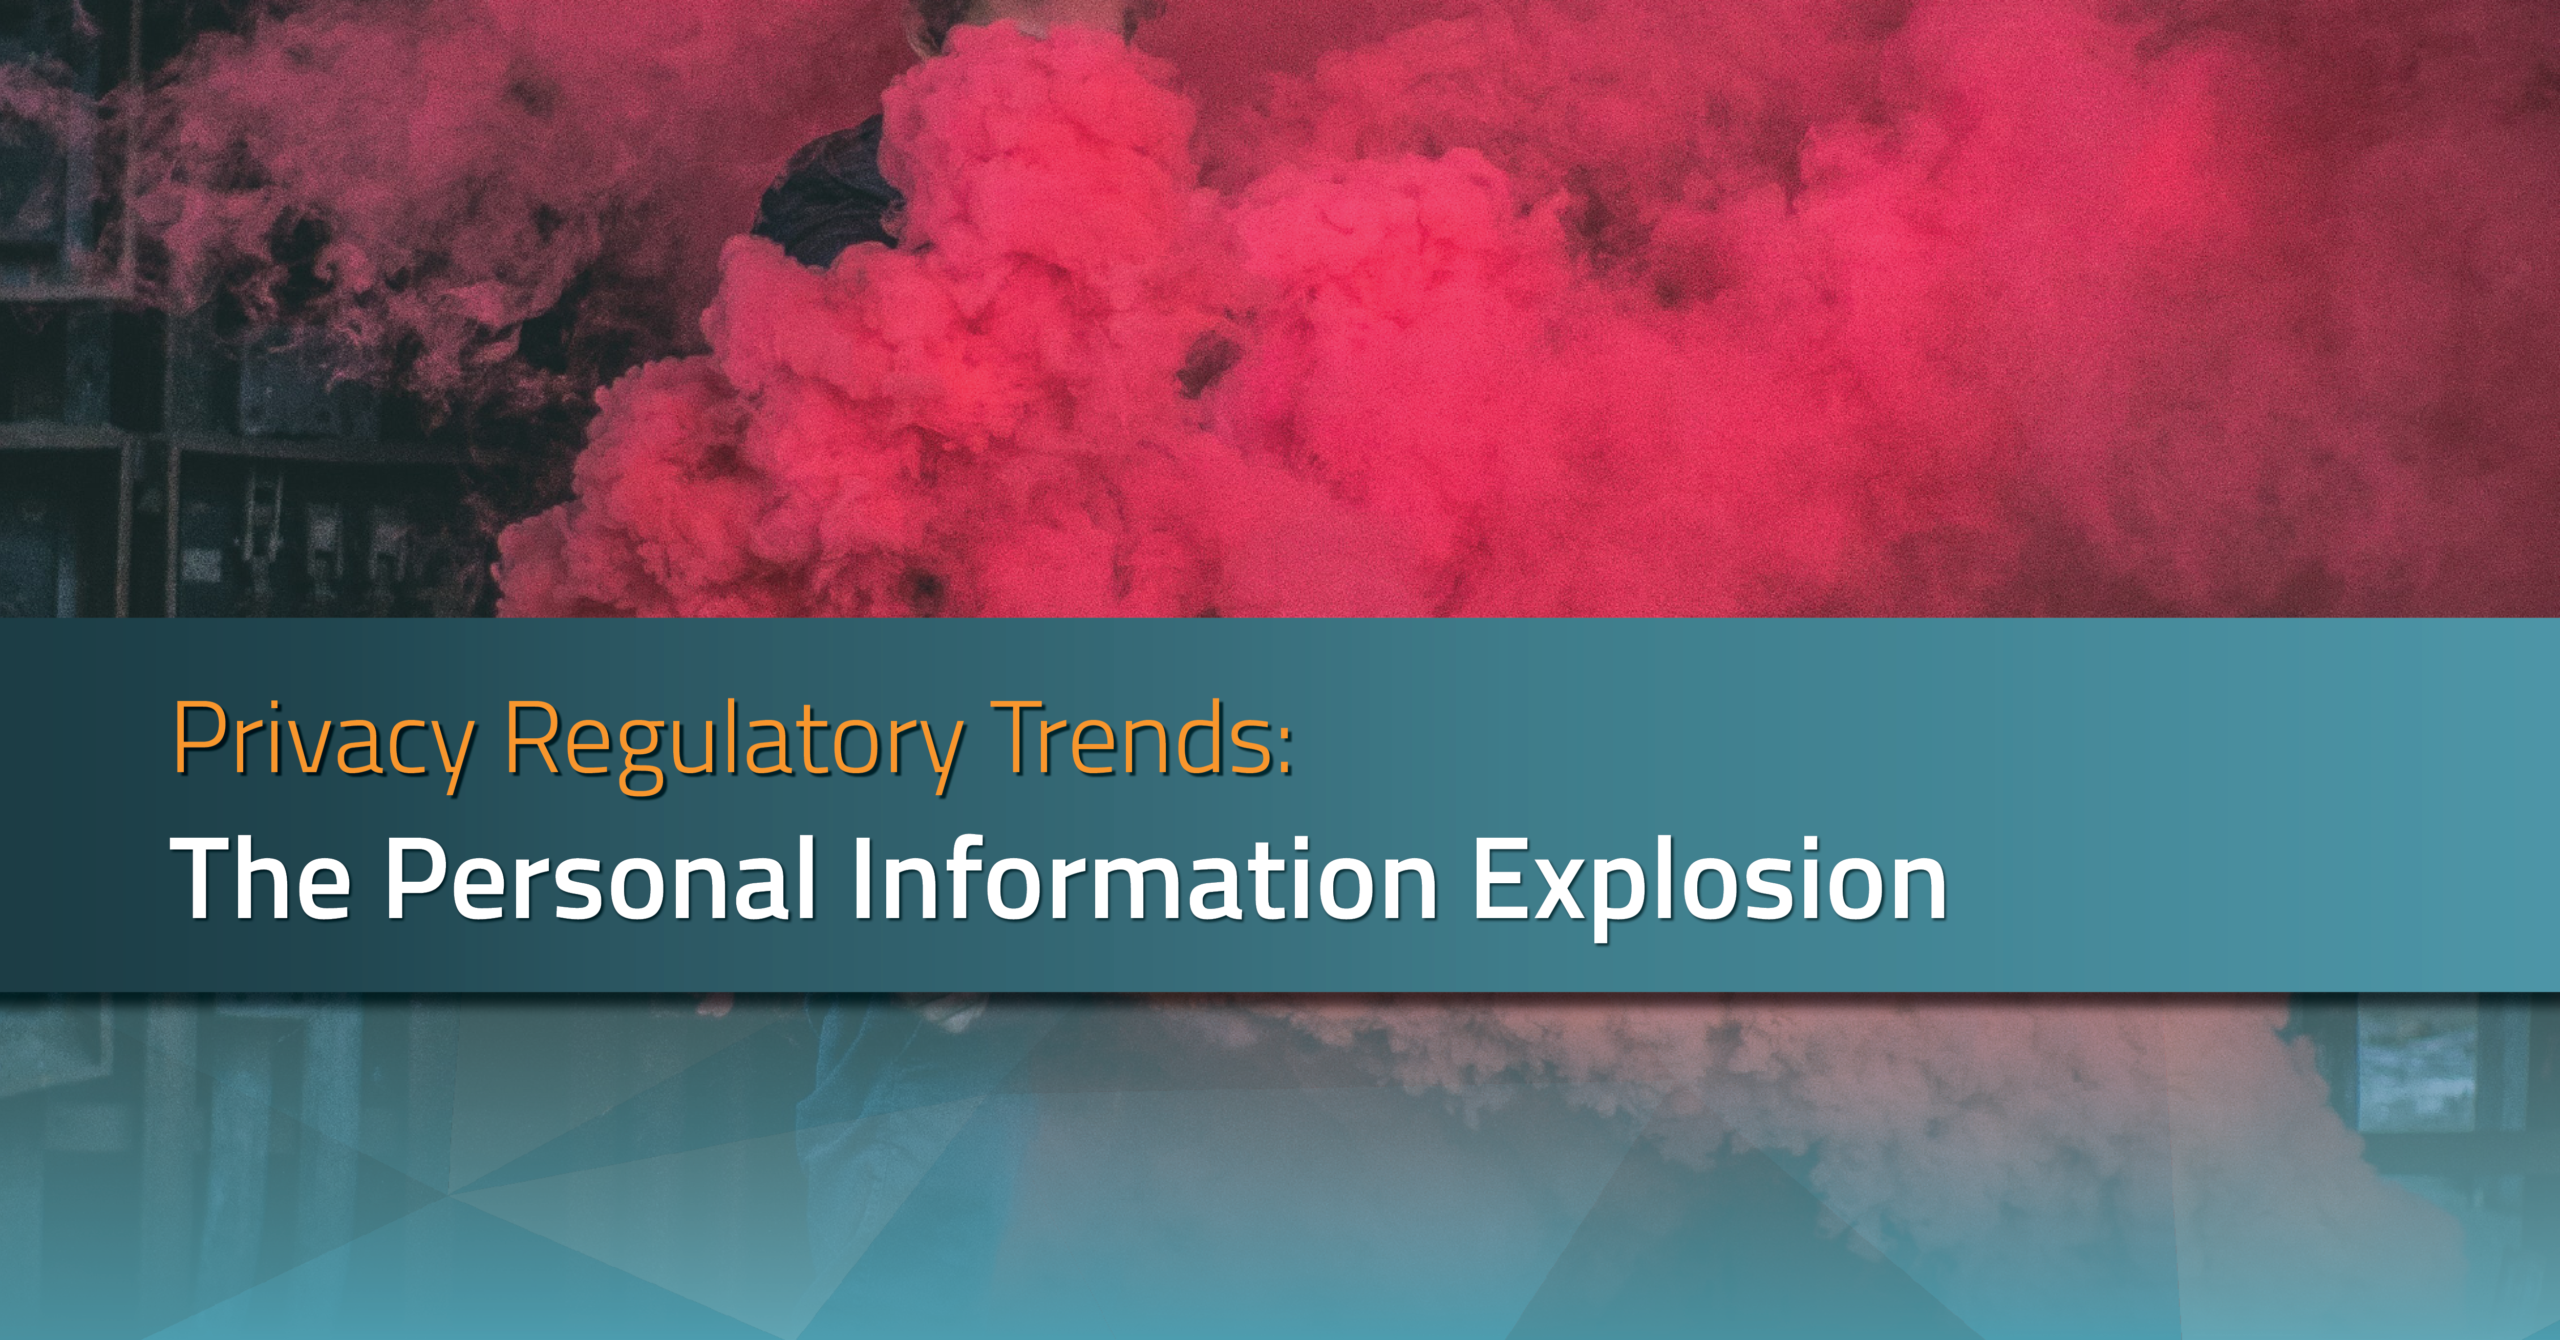 Privacy Regulatory Trends: The Personal Information Explosion